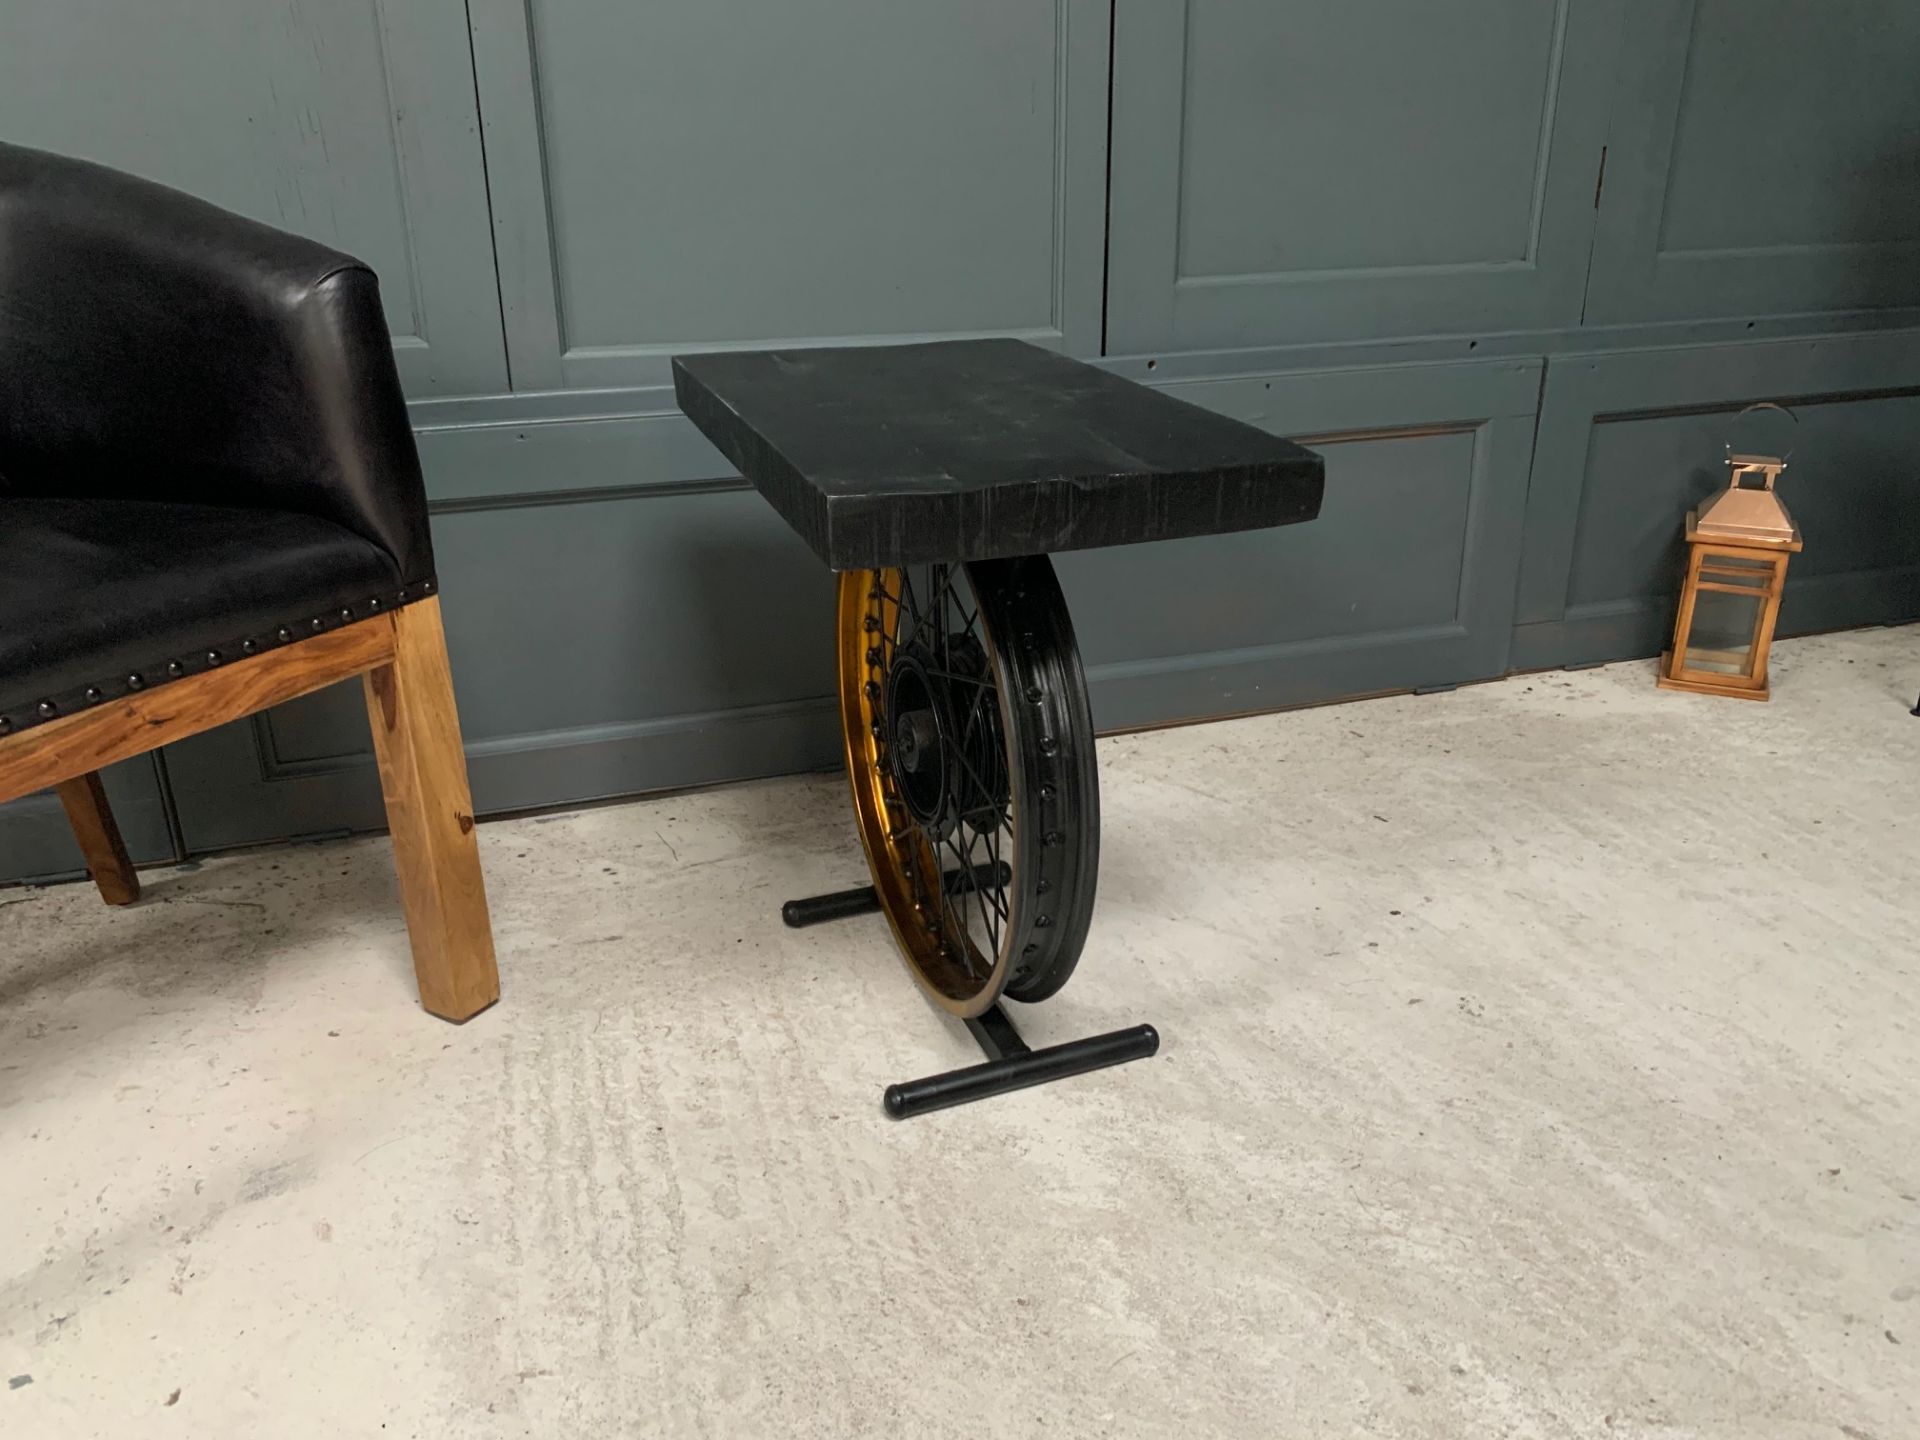 BOXED HANDMADE UPCYCLED ORIGINAL MOTORCYCLE WHEEL SIDE TABLE IN BLACK - Image 4 of 4